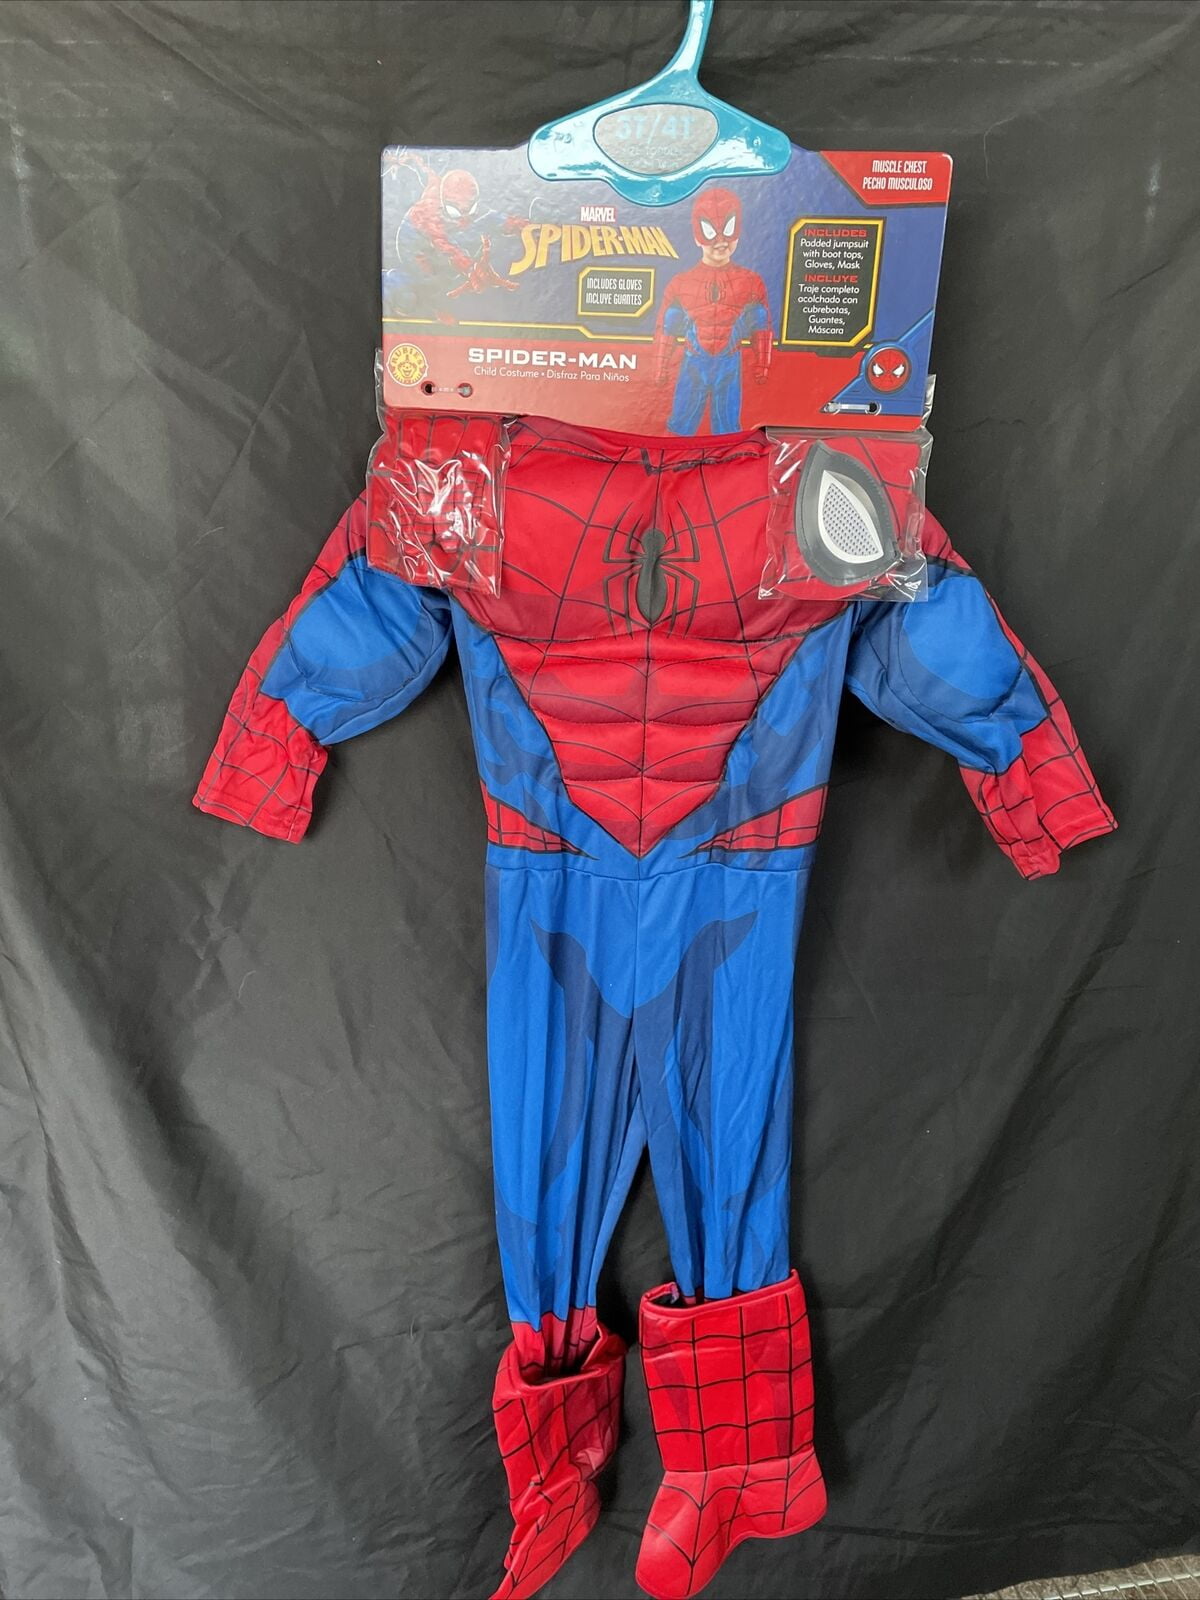 Details about   Spiderman costume,boys sz 7-8 2 styles,w/muscles,Super hero outfit,pretend play 